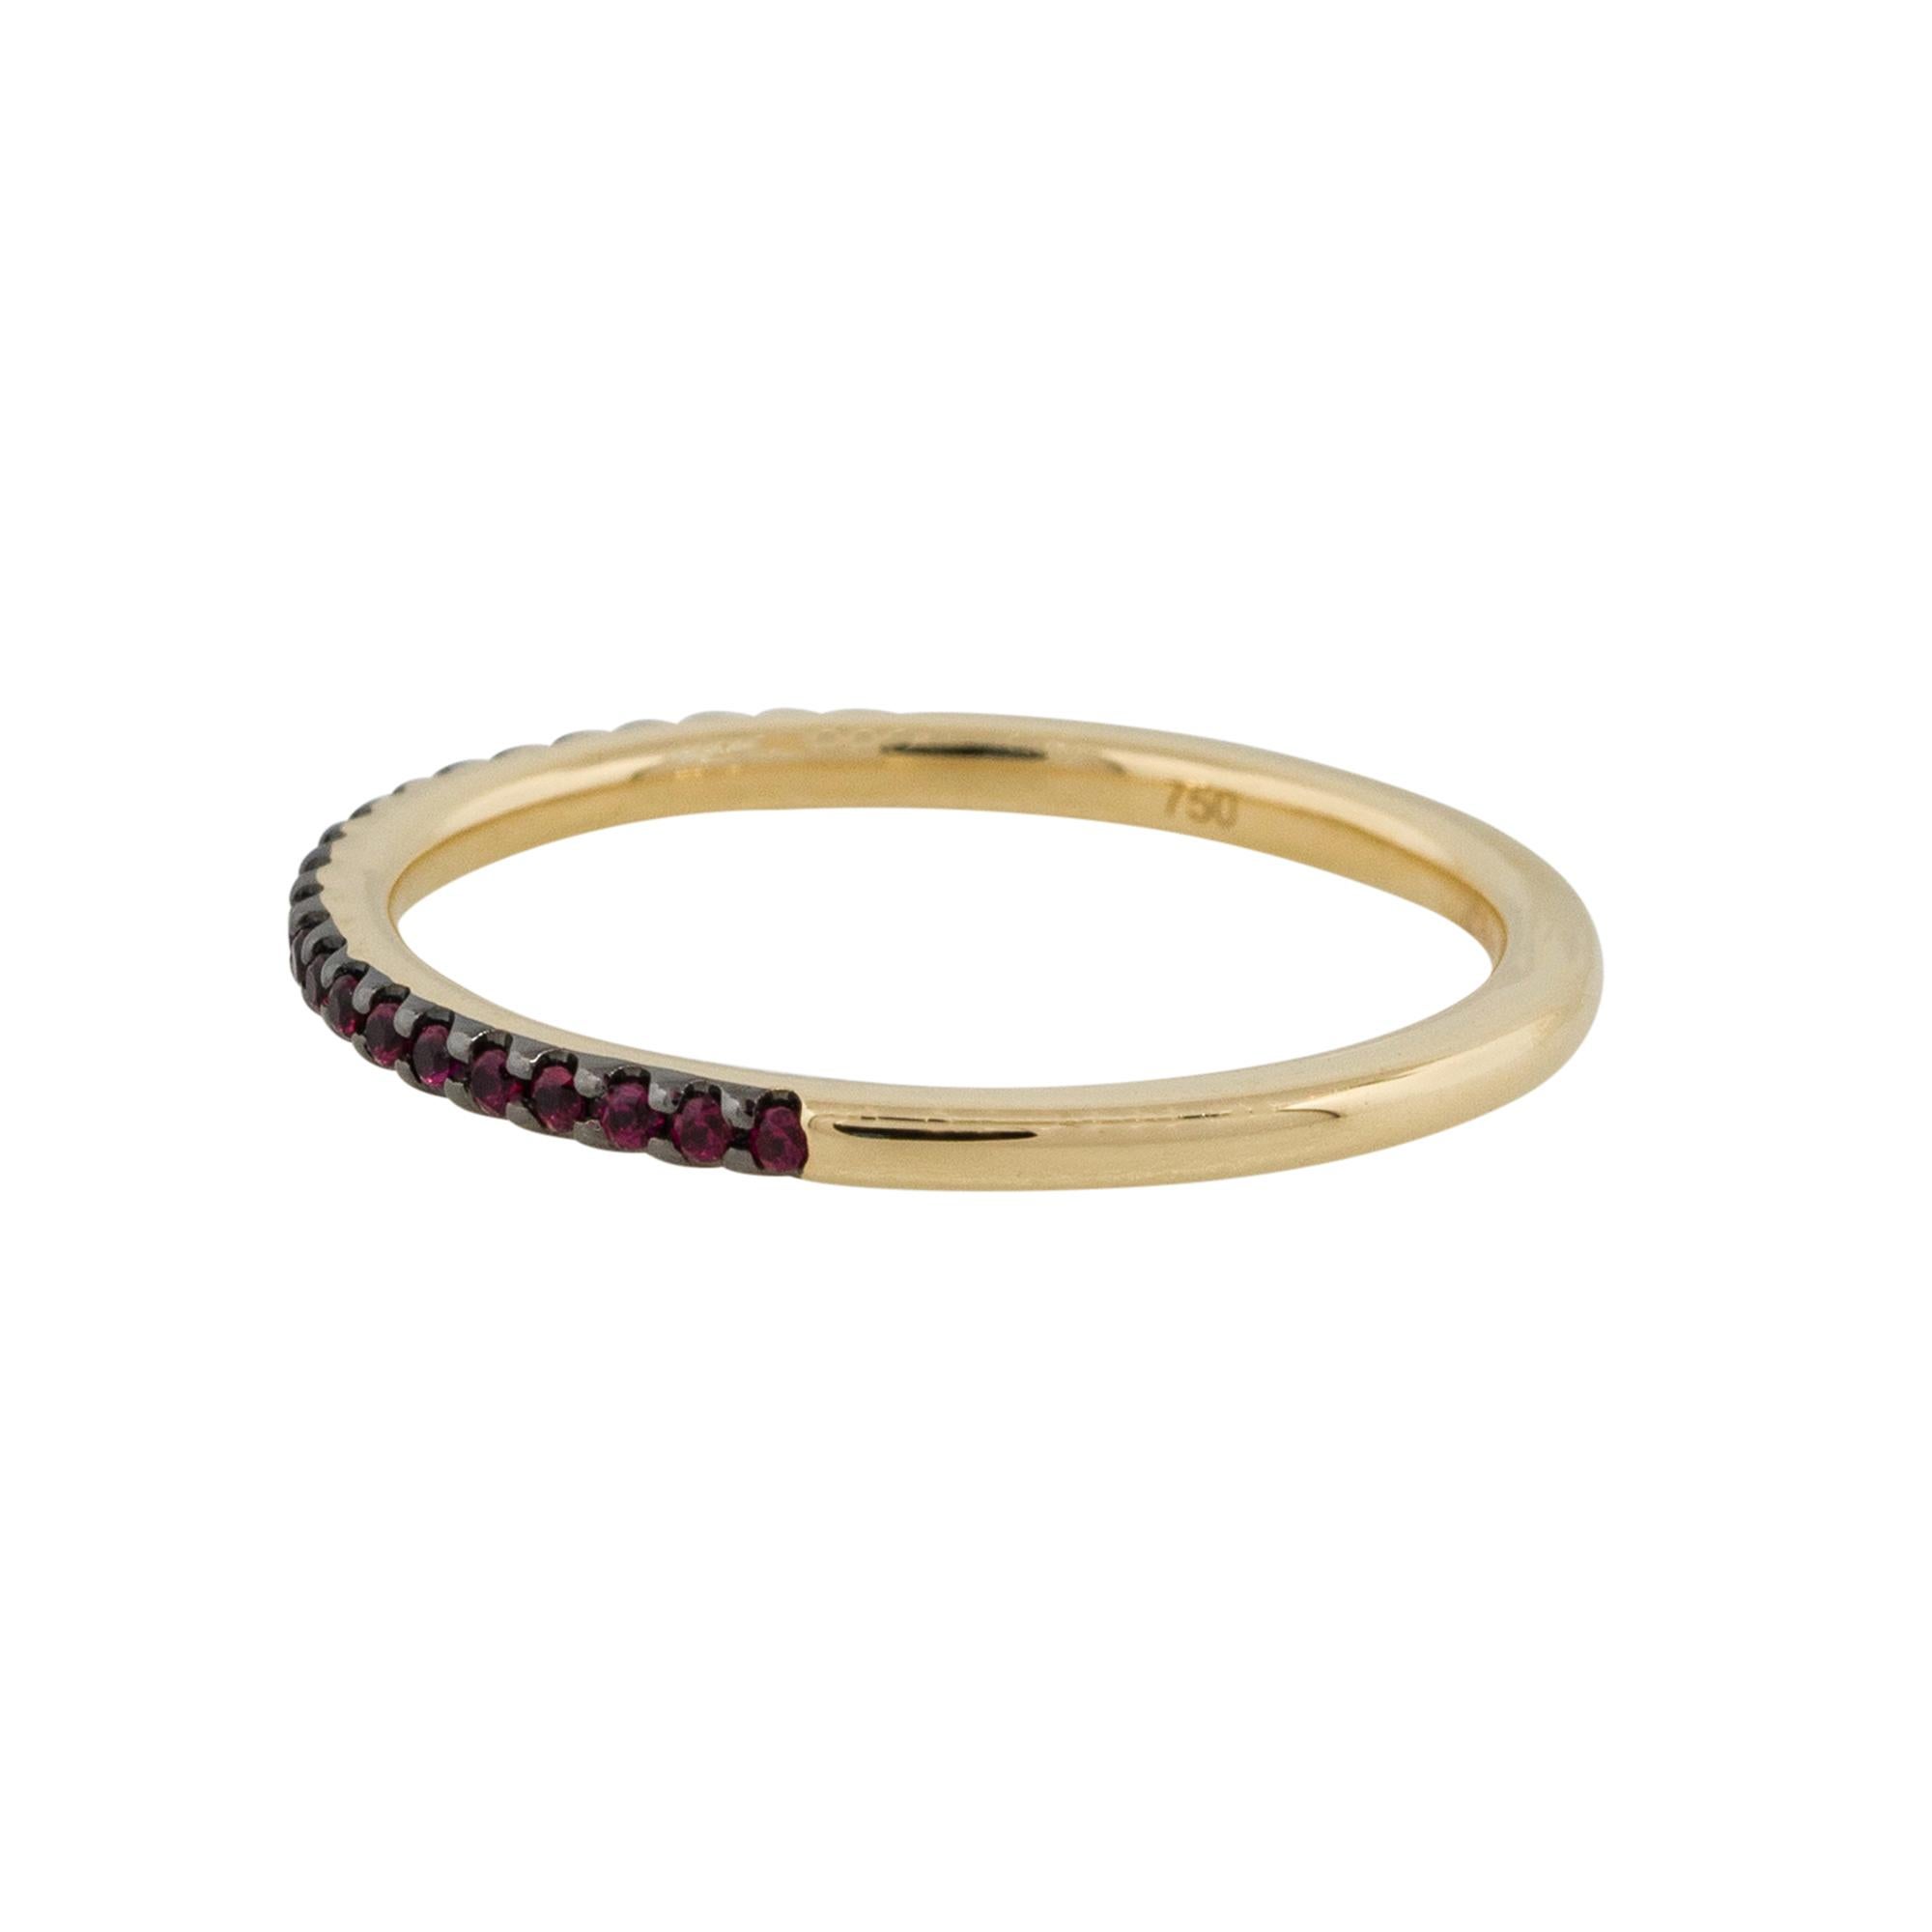 Material: 18k Yellow Gold
Gemstone details: Approximately 0.15ctw of round cut rubies
Ring Size: 6.5 
Total Weight: 2.1g (1.4 dwt)
Measurements: 1